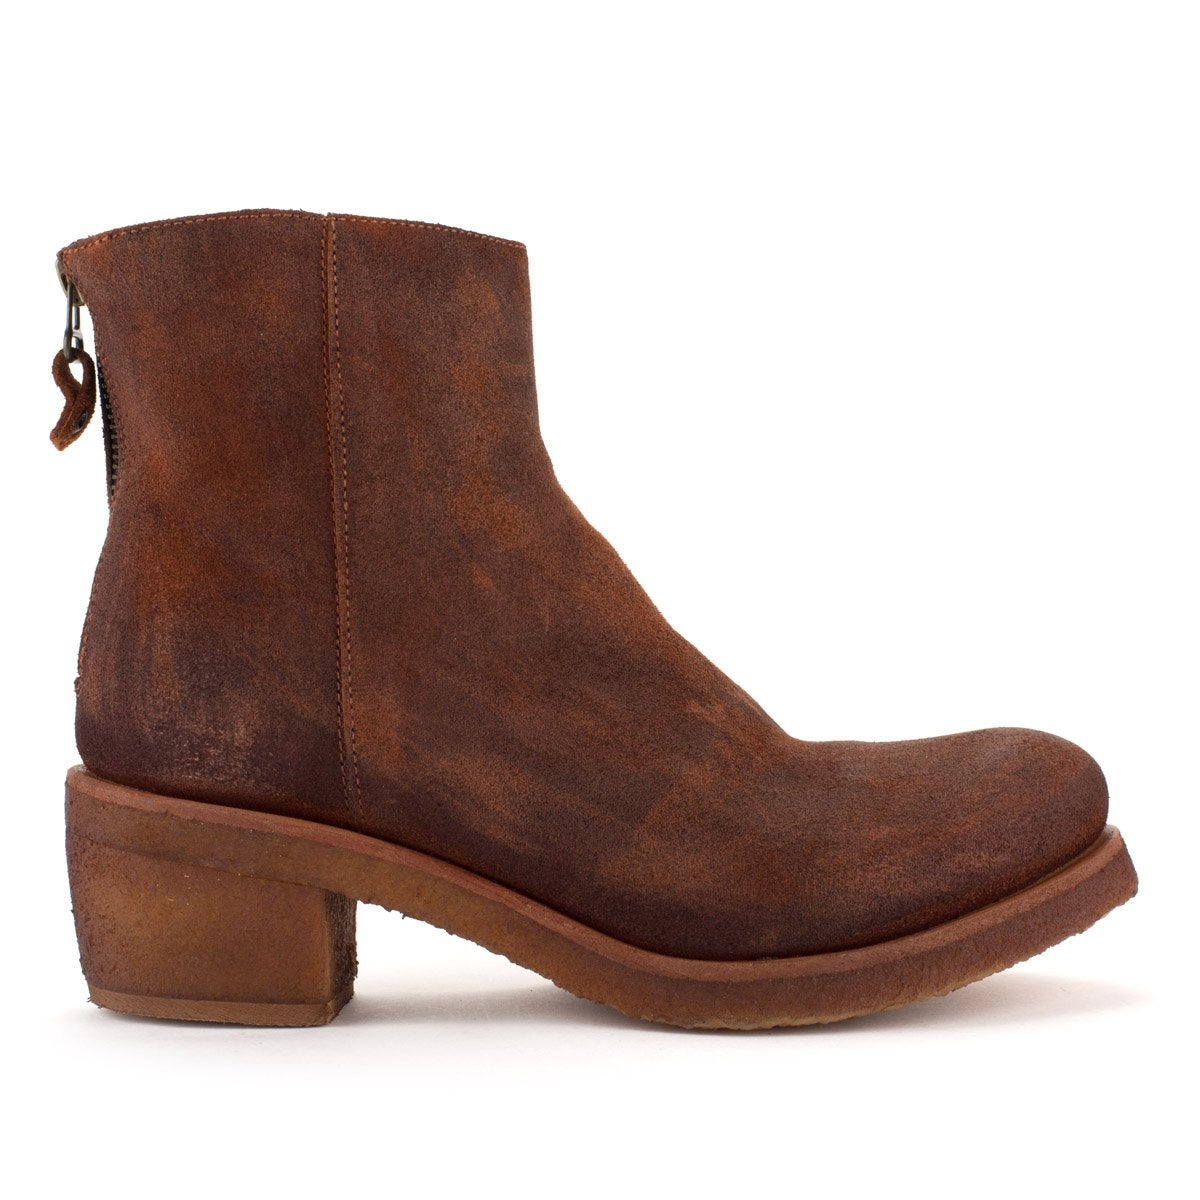 TEXAS 03 SUEDE BOOTS – Rust